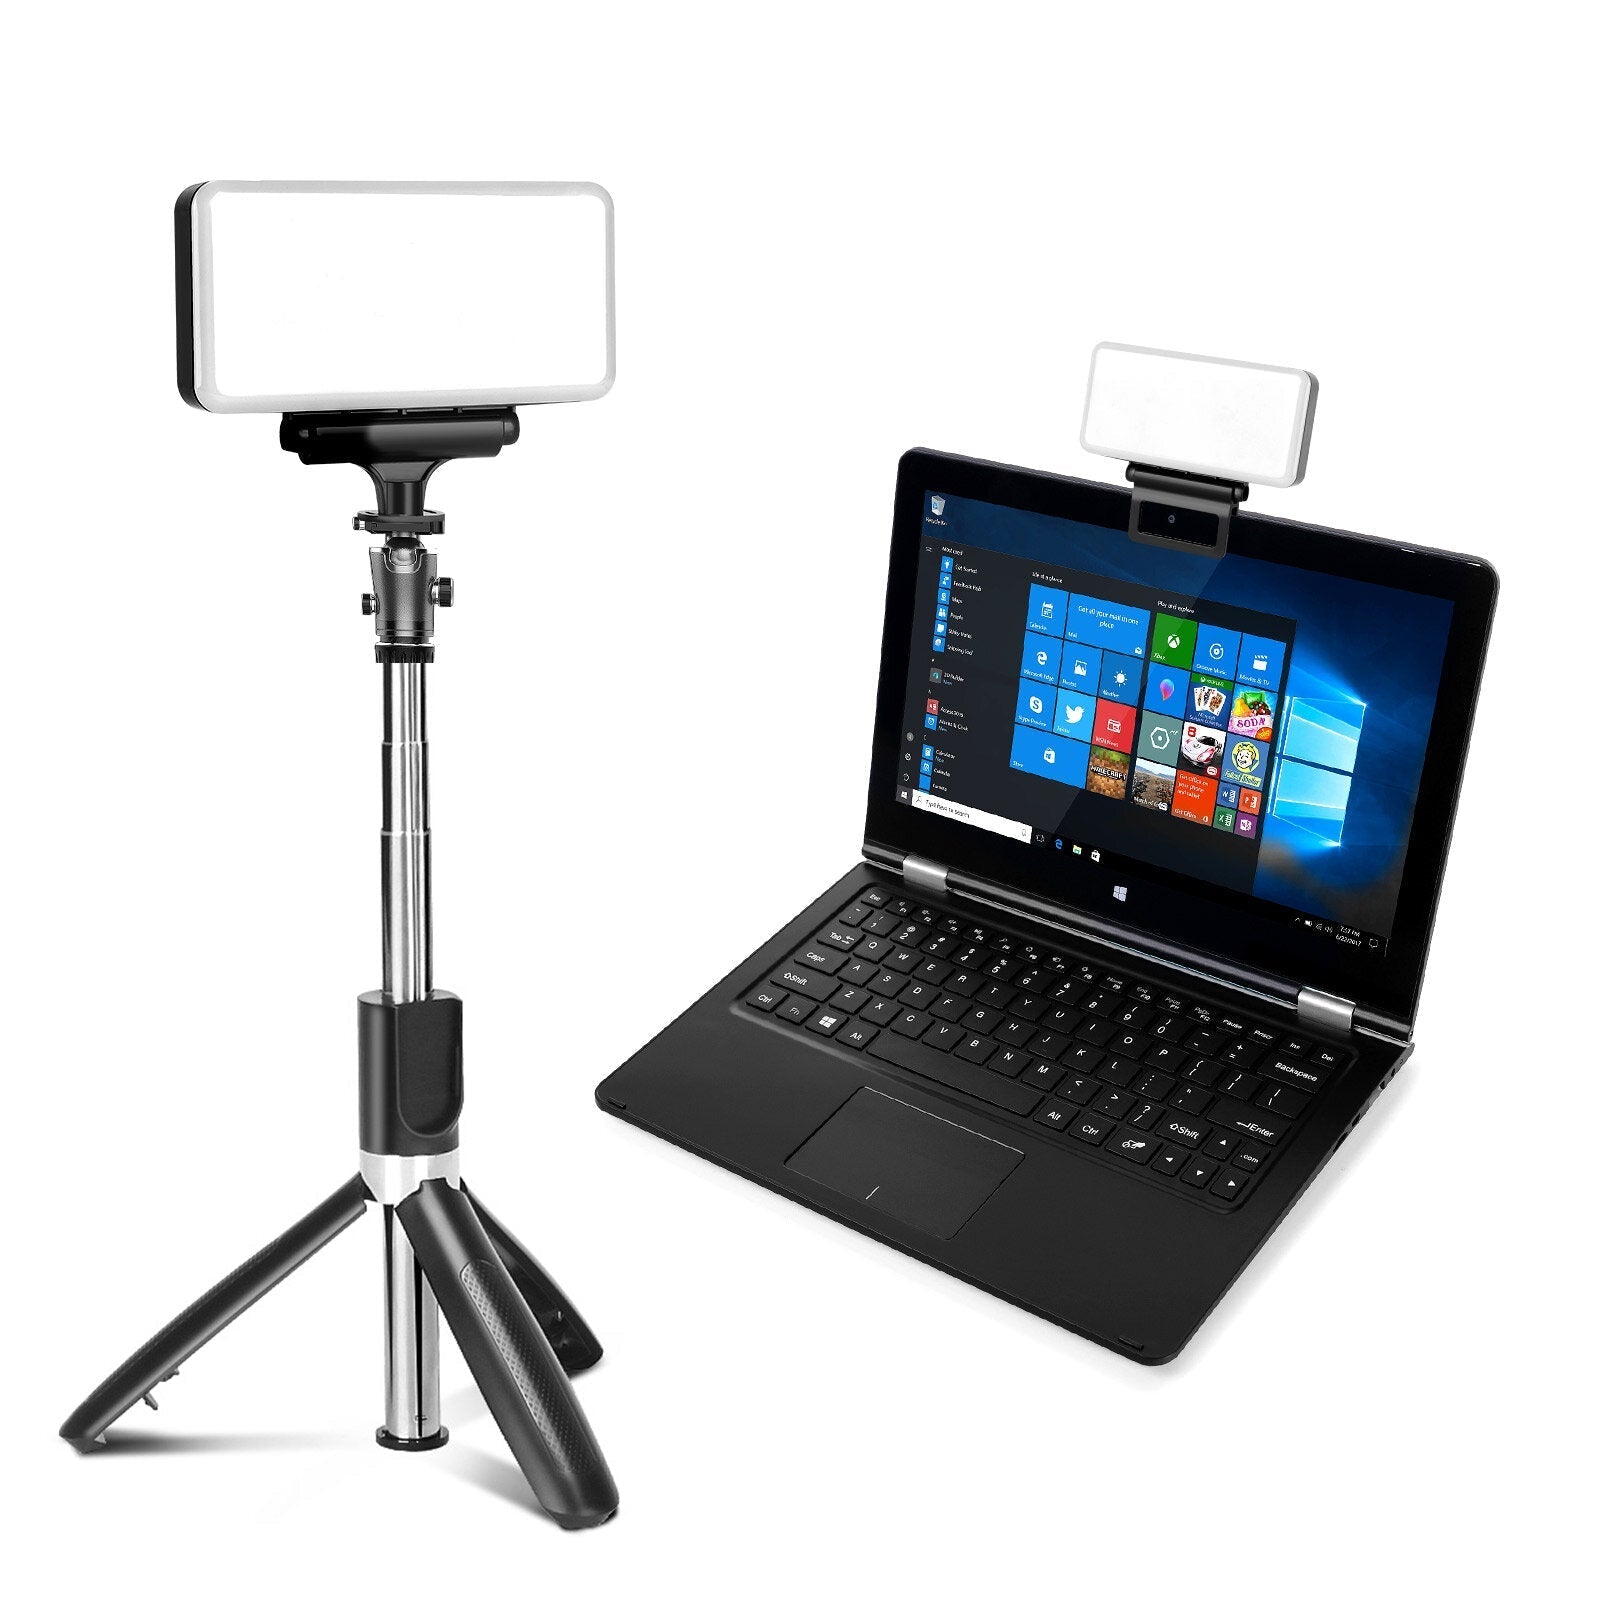 Video Light 2600K-6000k Fill Lamp with Three Stands for Camera Sport Cameras PC Laptop Phone Tripod Monopod